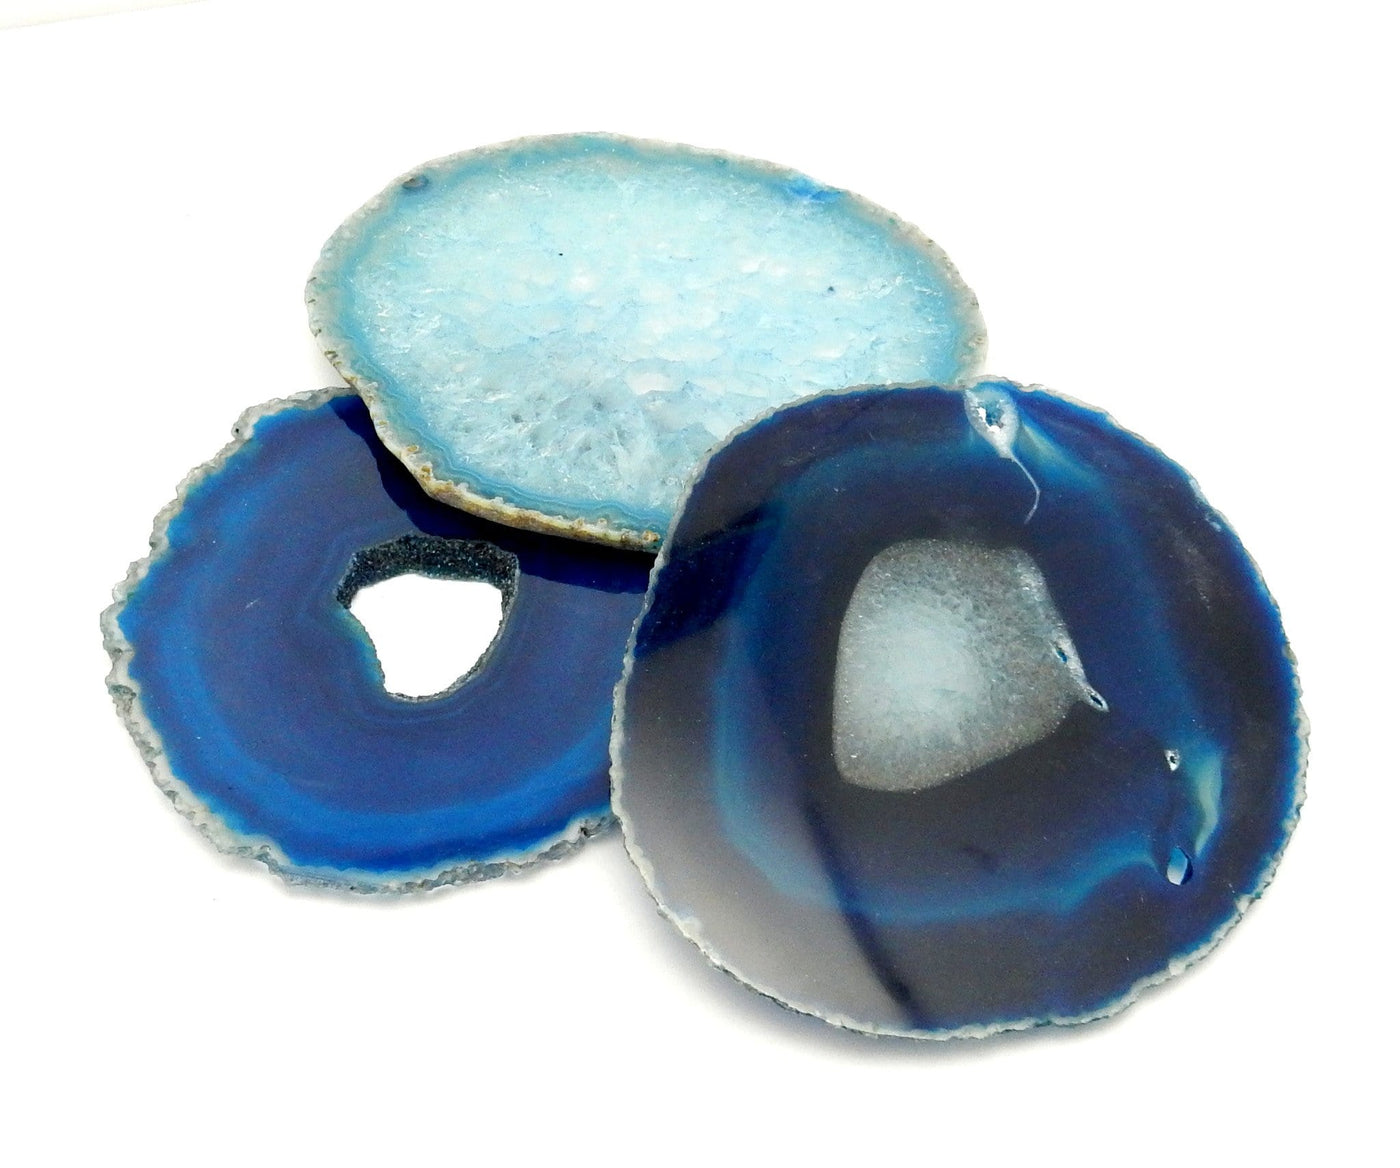 Blue Agate Slices laid out for thickness reference color and pattern variations